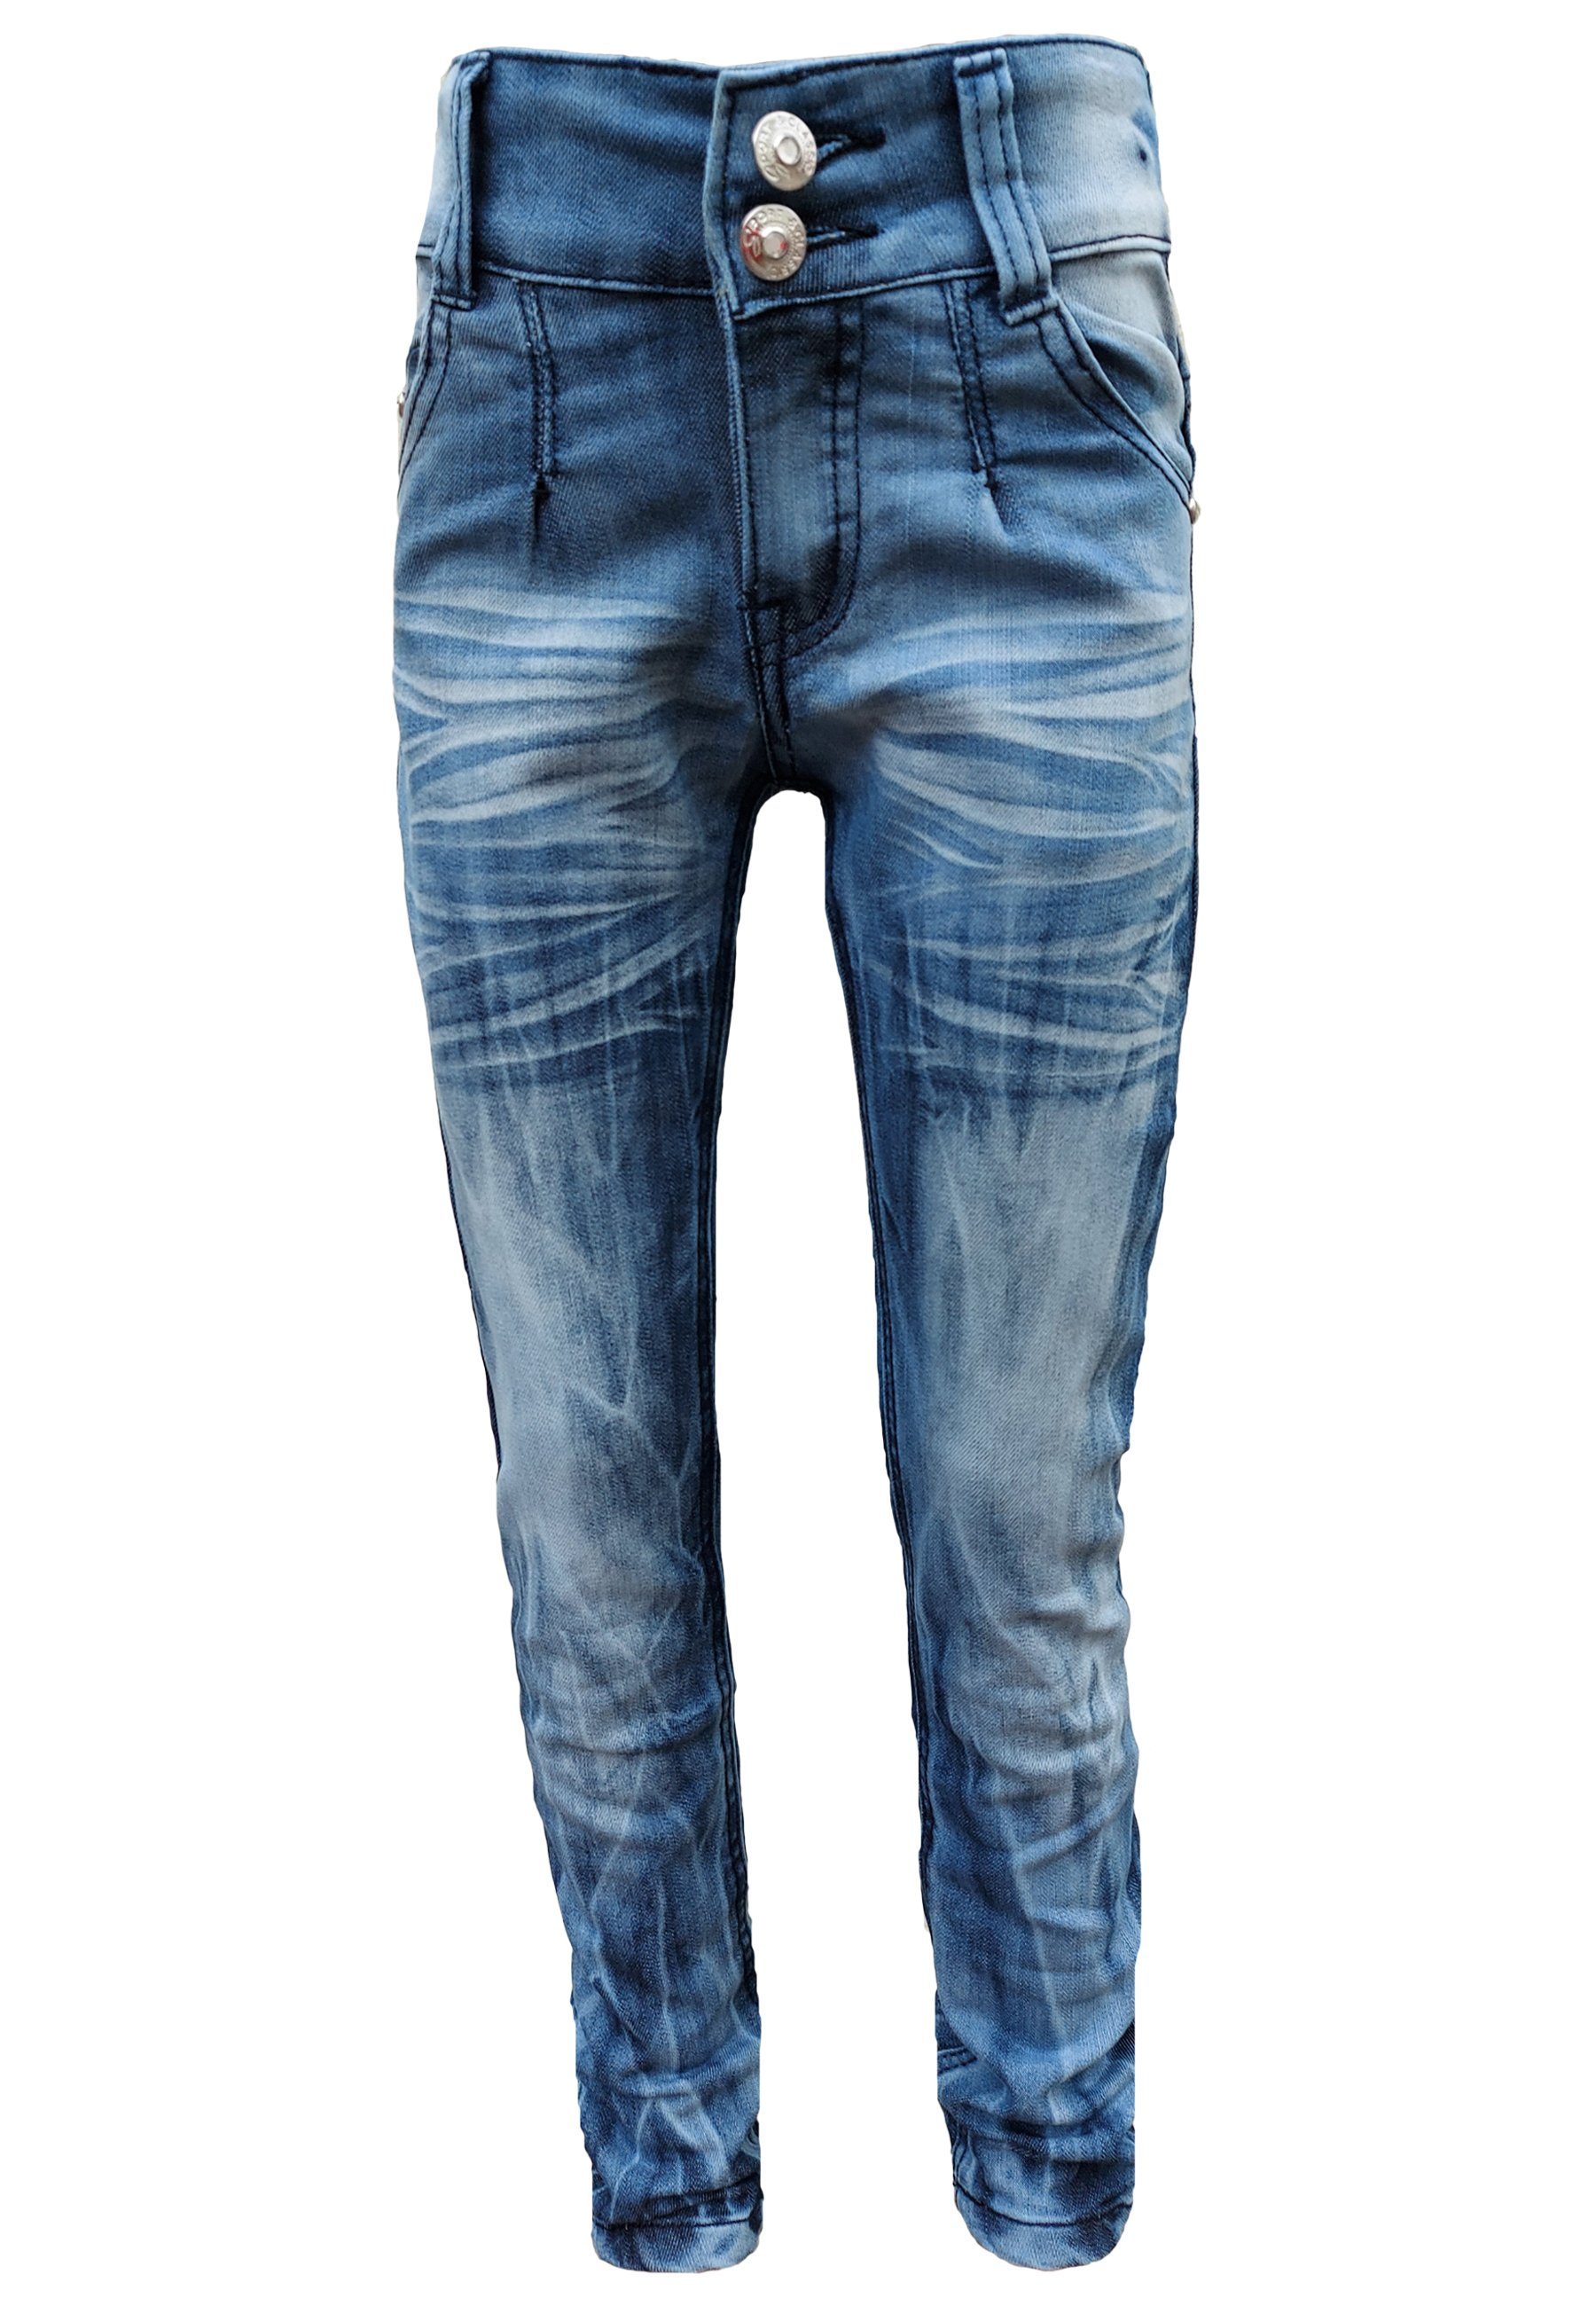 Family Trends Bequeme Jeans Jeans mit modischer Waschung